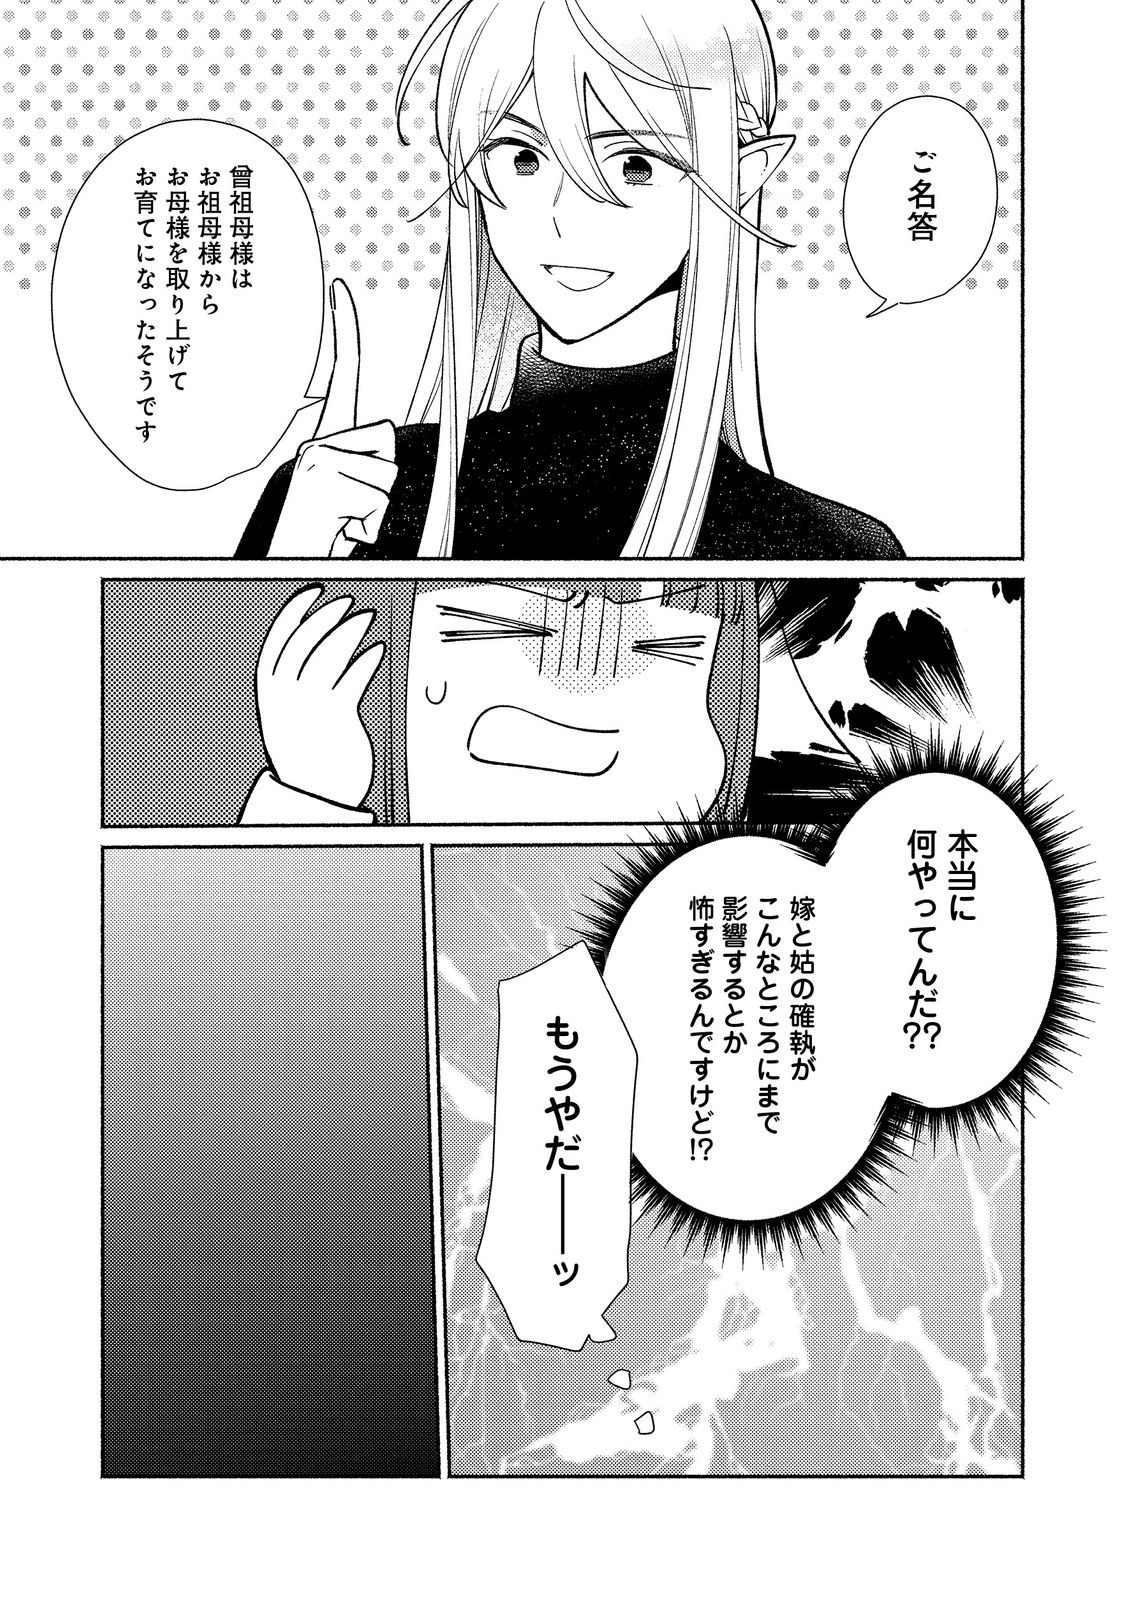 I’m the White Pig Nobleman 第25.1話 - Page 9